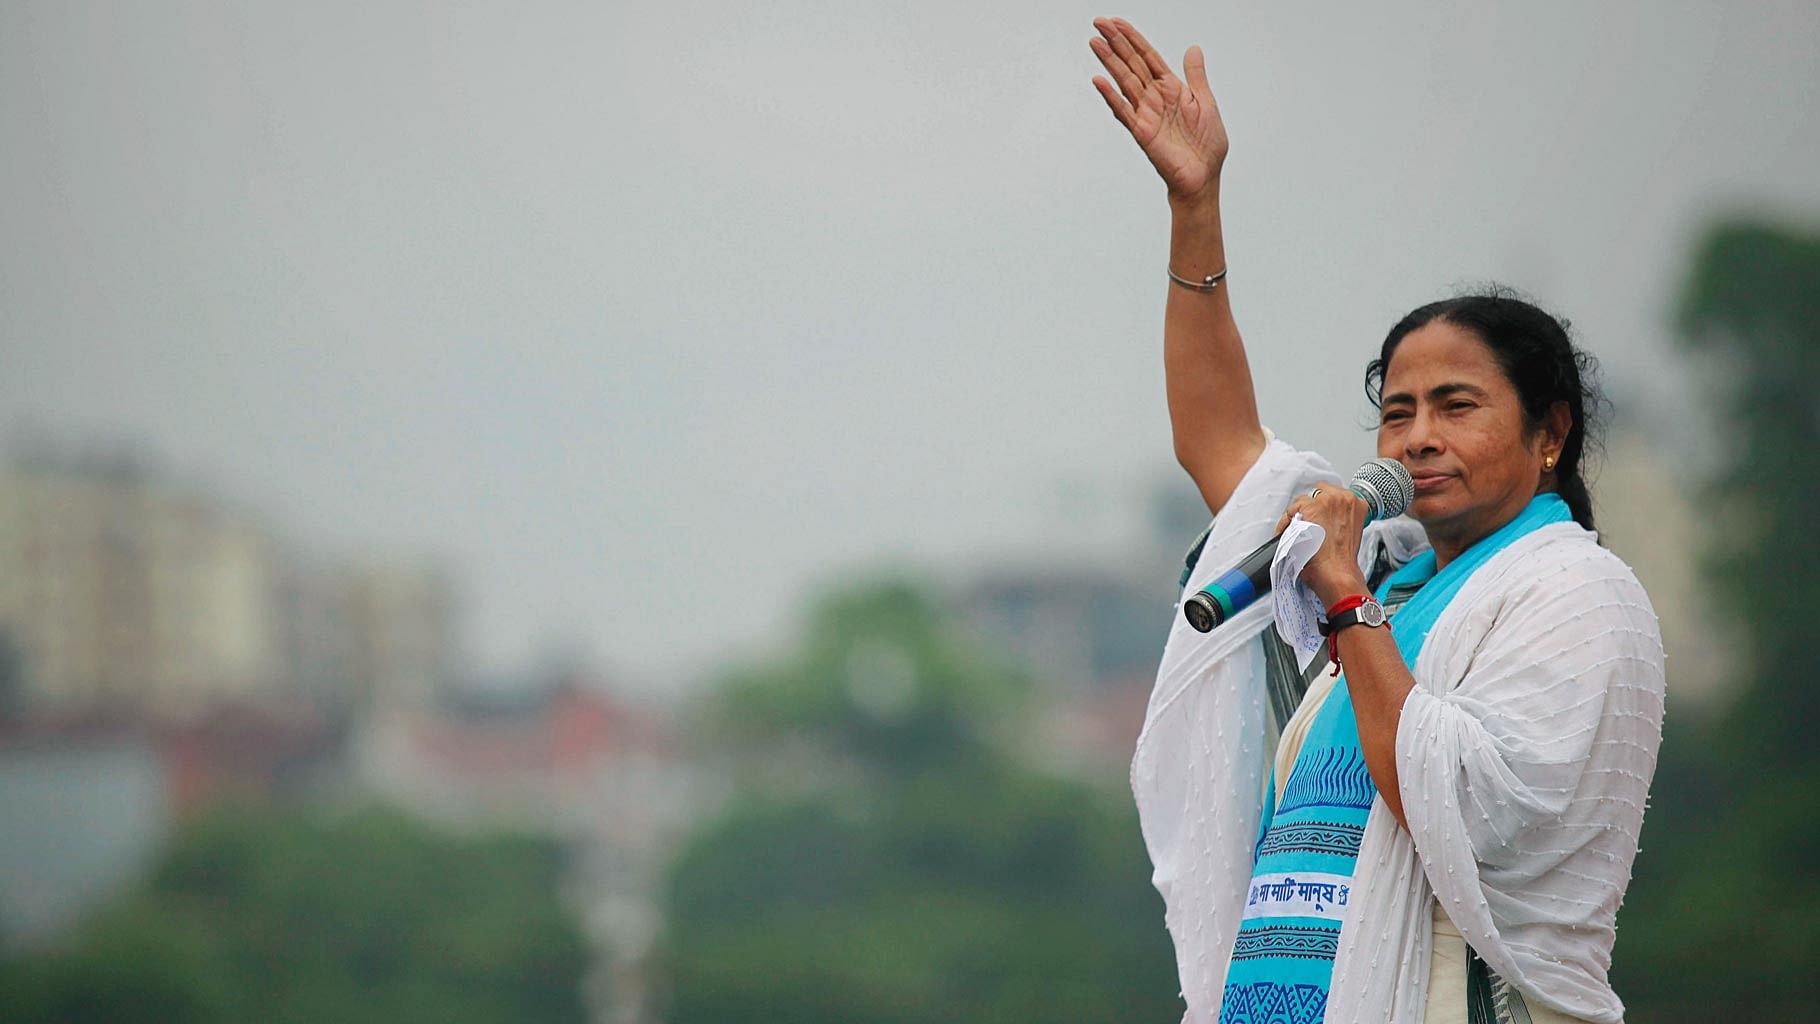 West Bengal Chief Minister Mamata Banerjee. (Photo: Reuters)